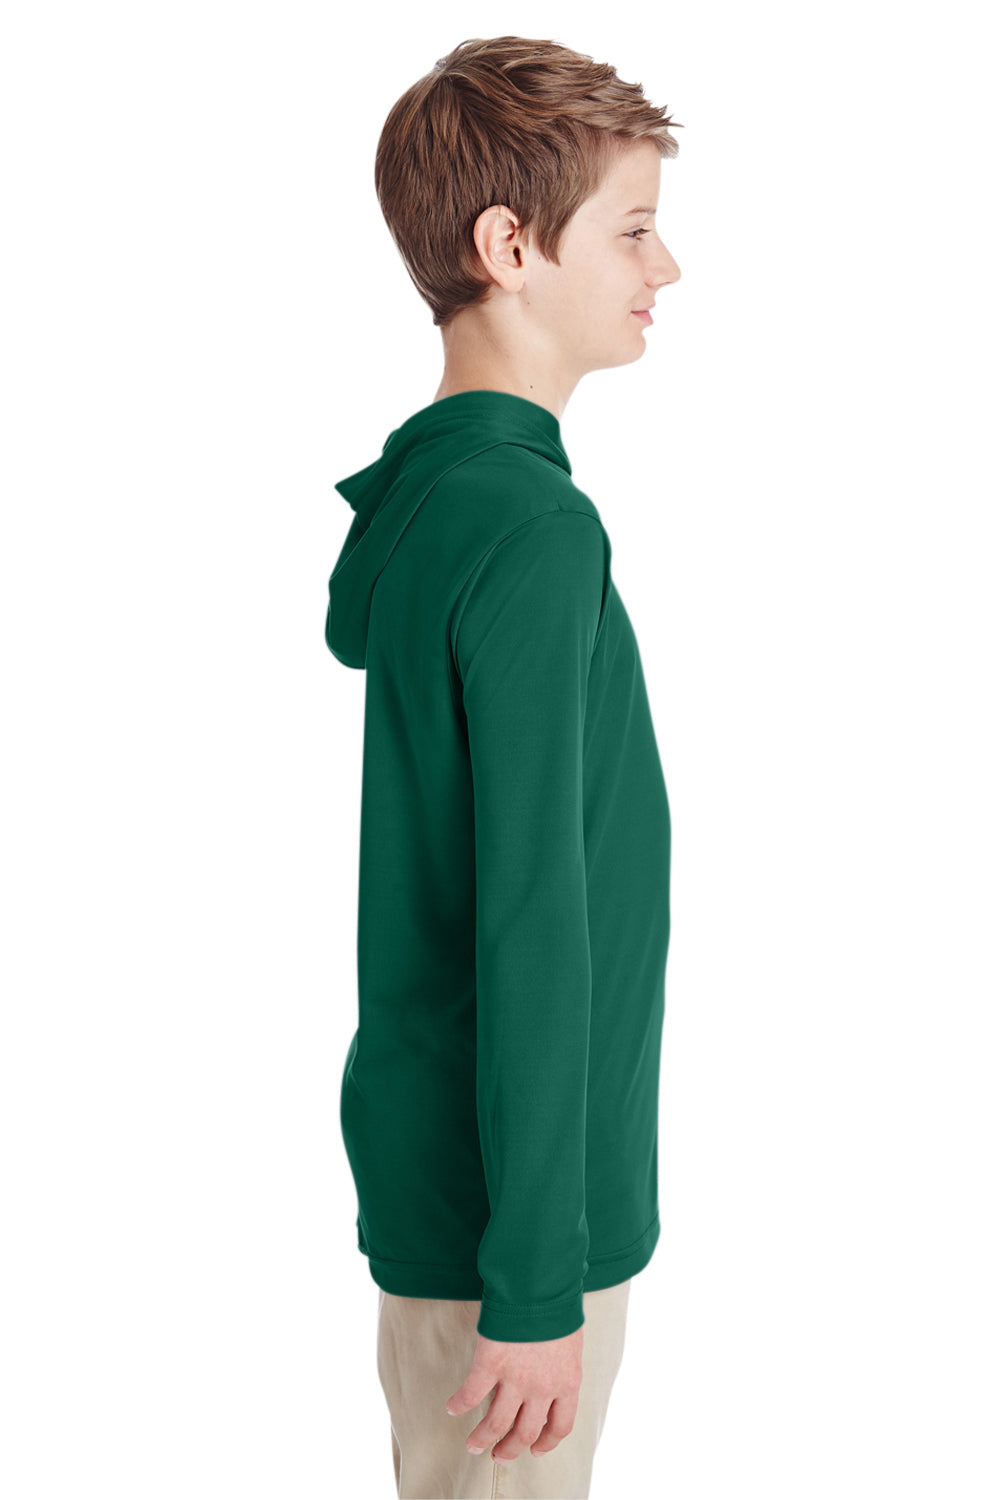 Team 365 TT41Y Youth Zone Performance Moisture Wicking Long Sleeve Hooded T-Shirt Hoodie Forest Green Side